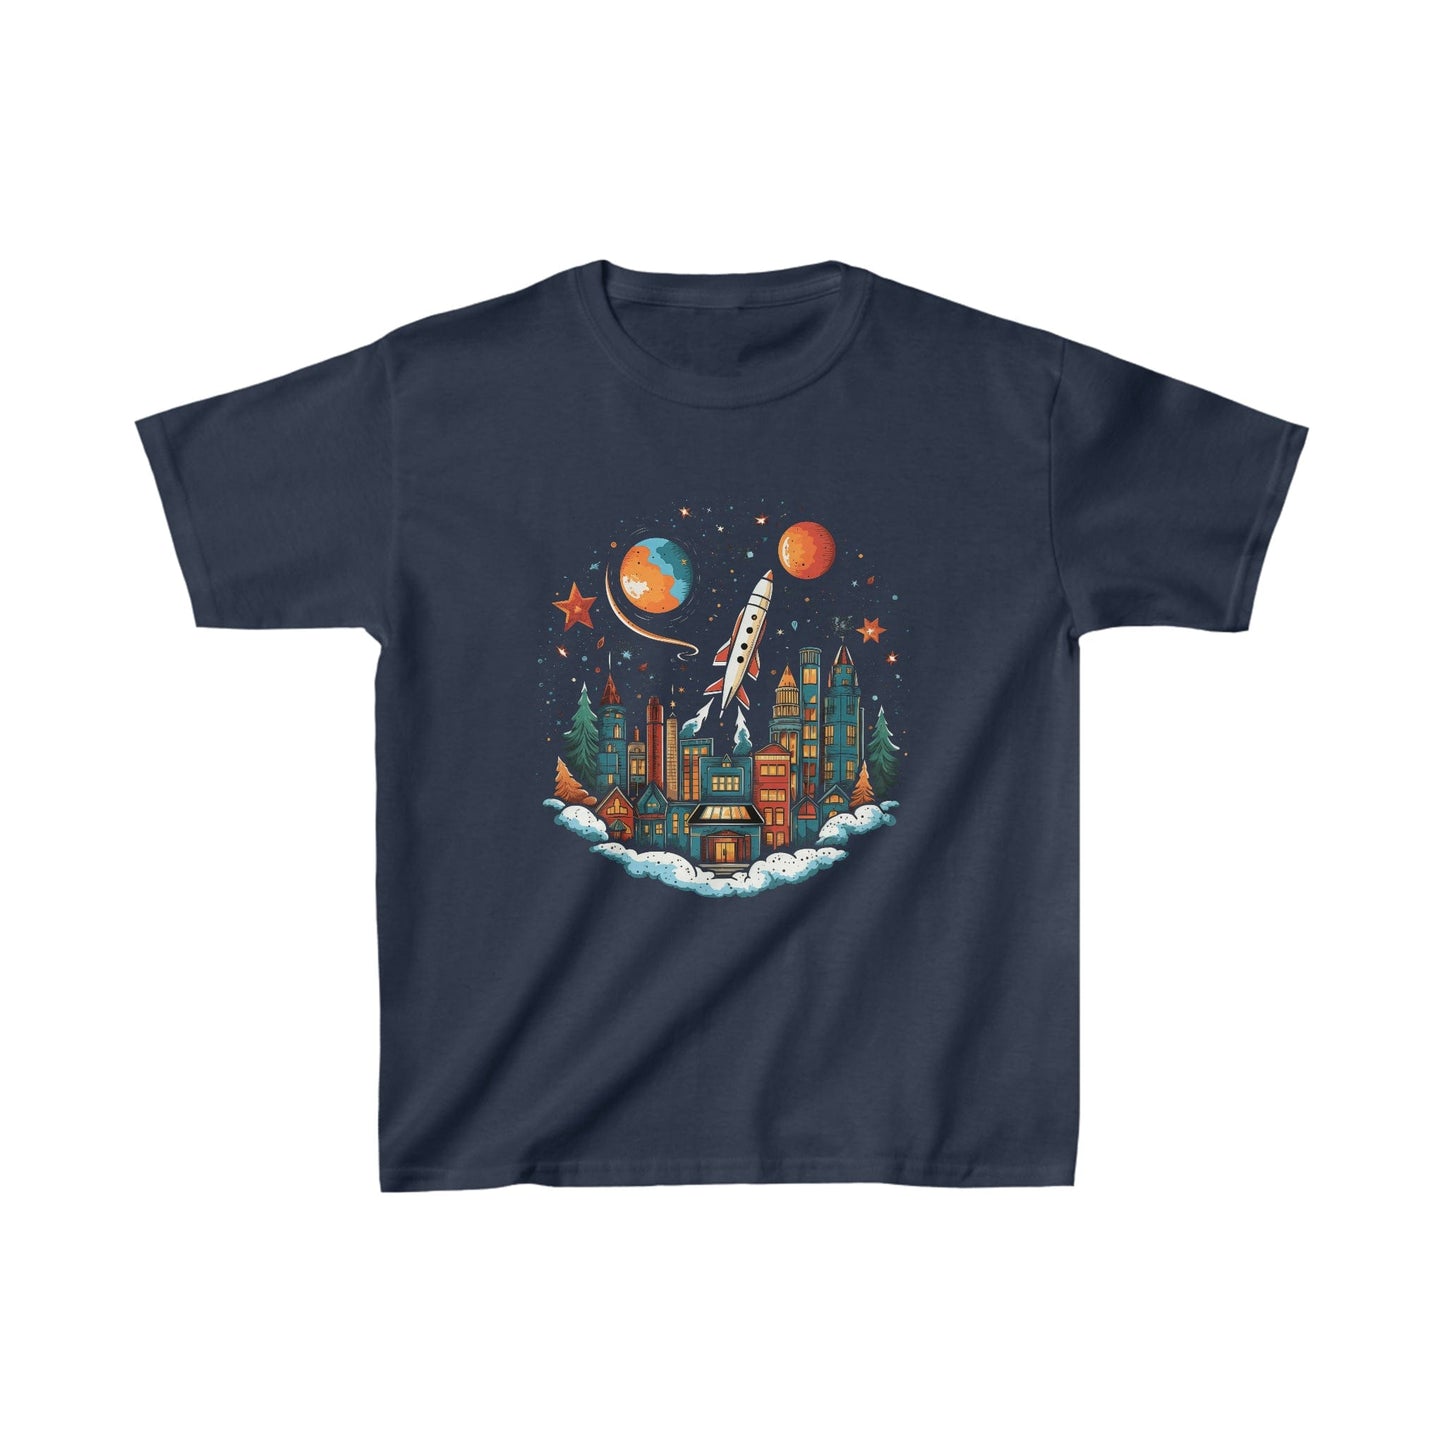 Kids clothes XS / Navy Youth Holiday Rocket Launch T-Shirt